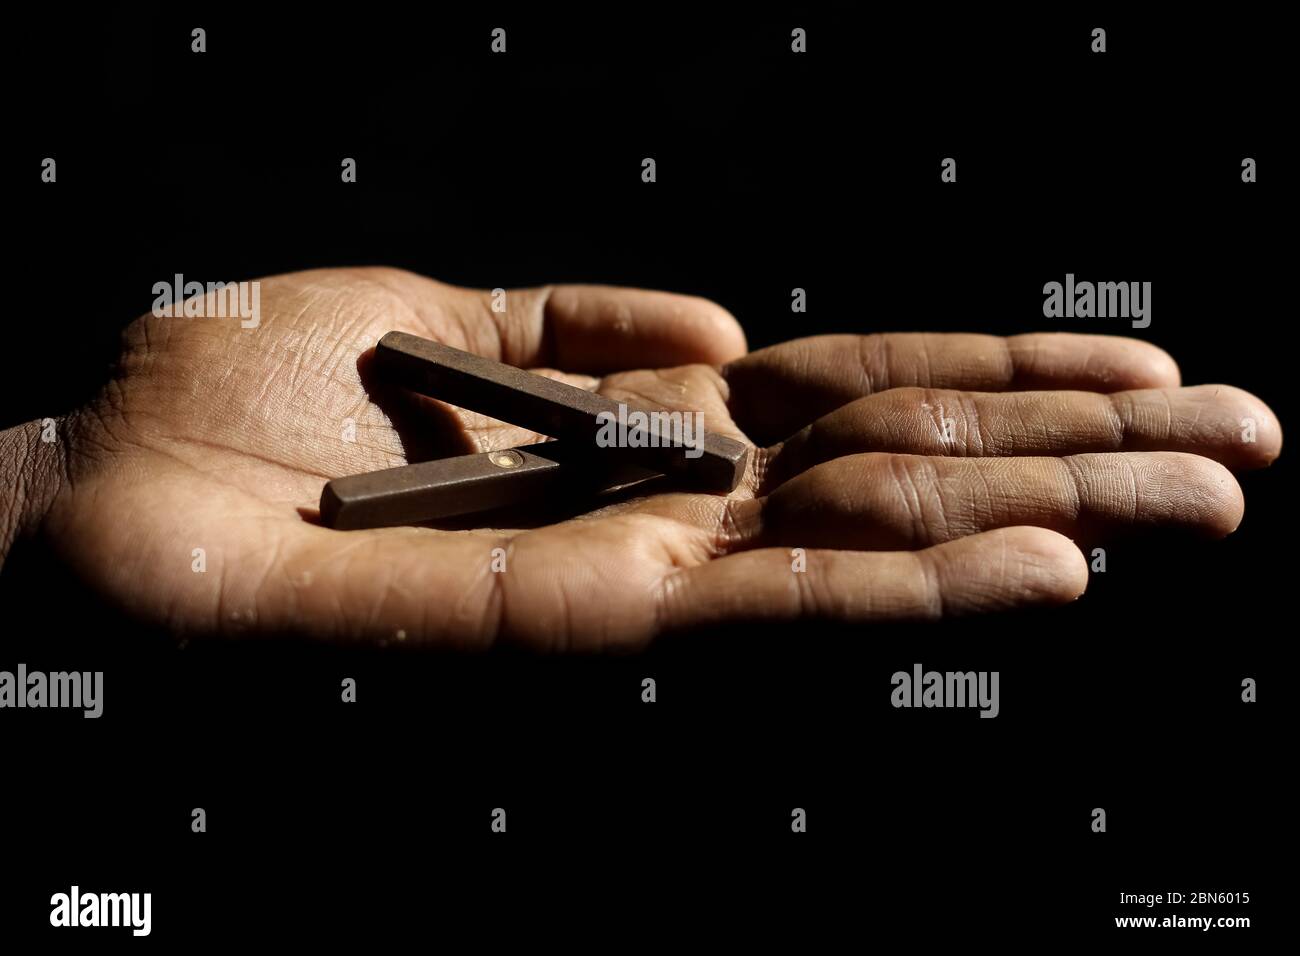 Antique Indian copper Long / Stick Dices with 1-2-5-6 to the 4 long sides holding on Hand isolated on black background. Indian Four Sided Ludo game di Stock Photo